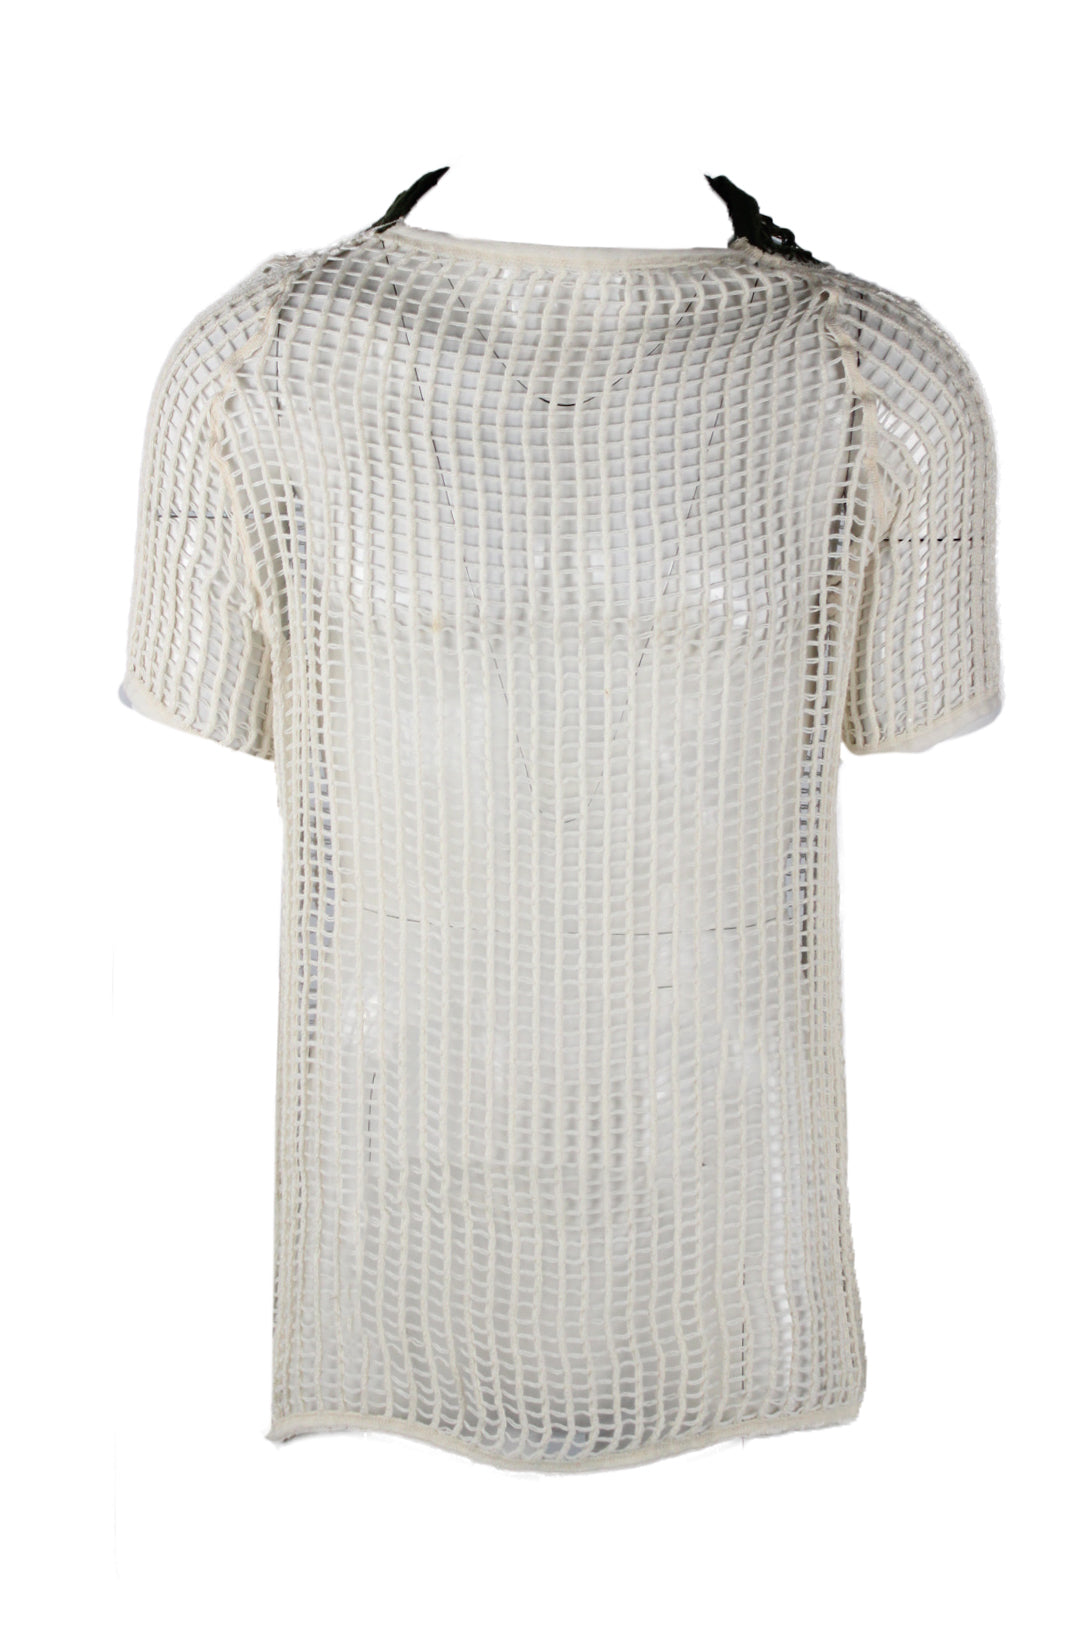 front view of unlabeled white/sage loose knit t-shirt. features contrast sage panel at back with ribbed collar/cuffs/hem.